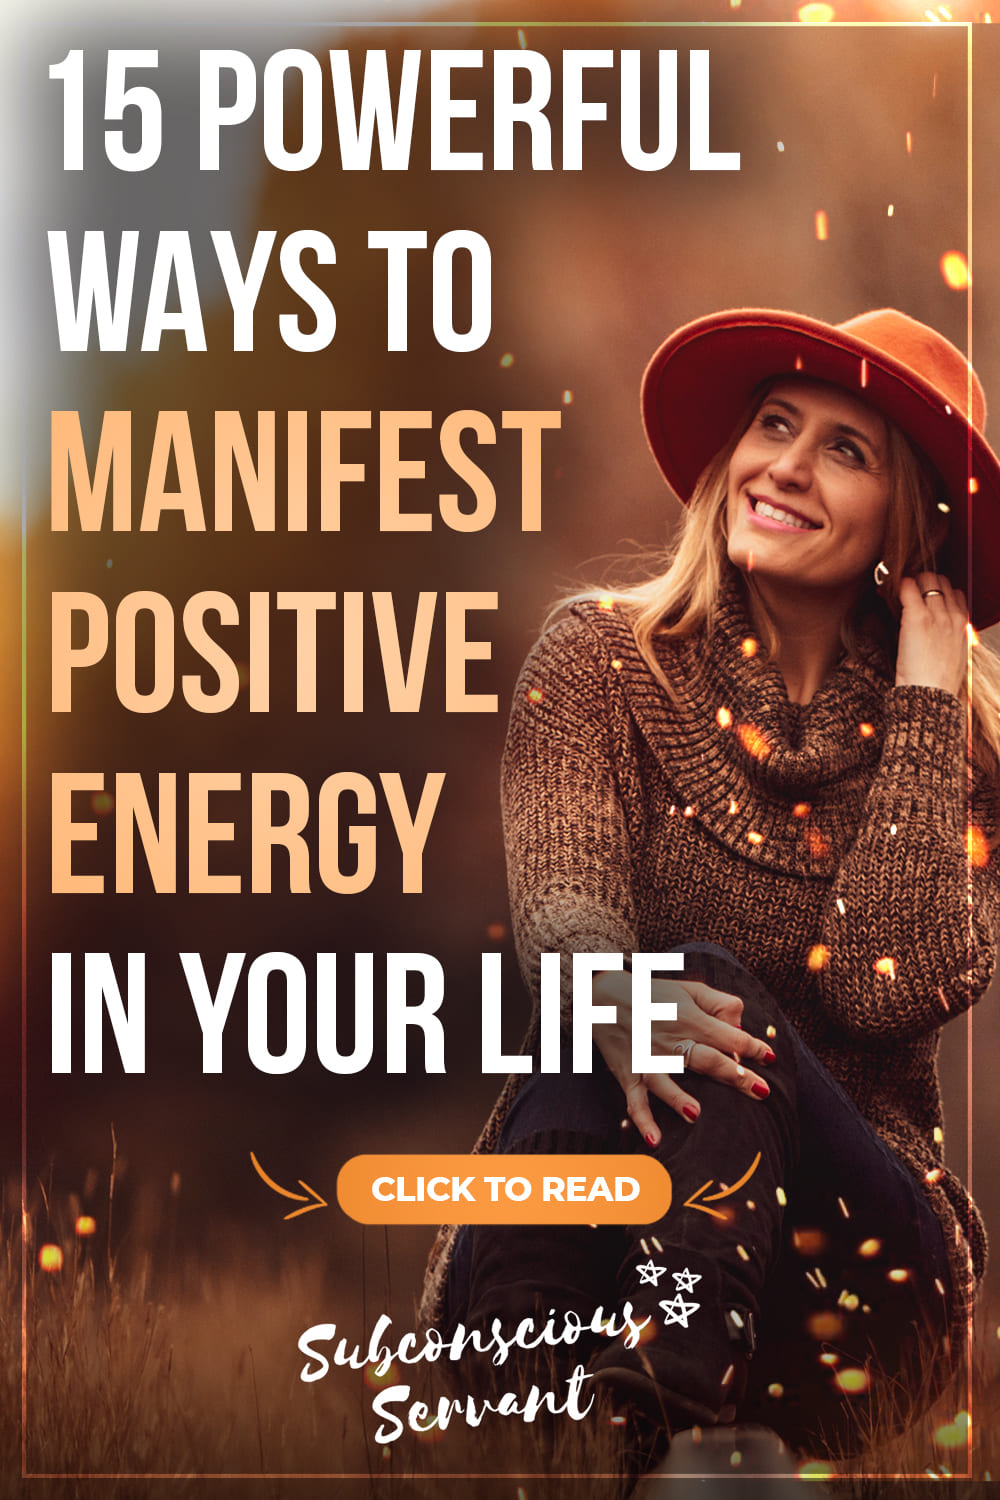 15 Powerful Ways To Manifest Positive Energy In Your Life